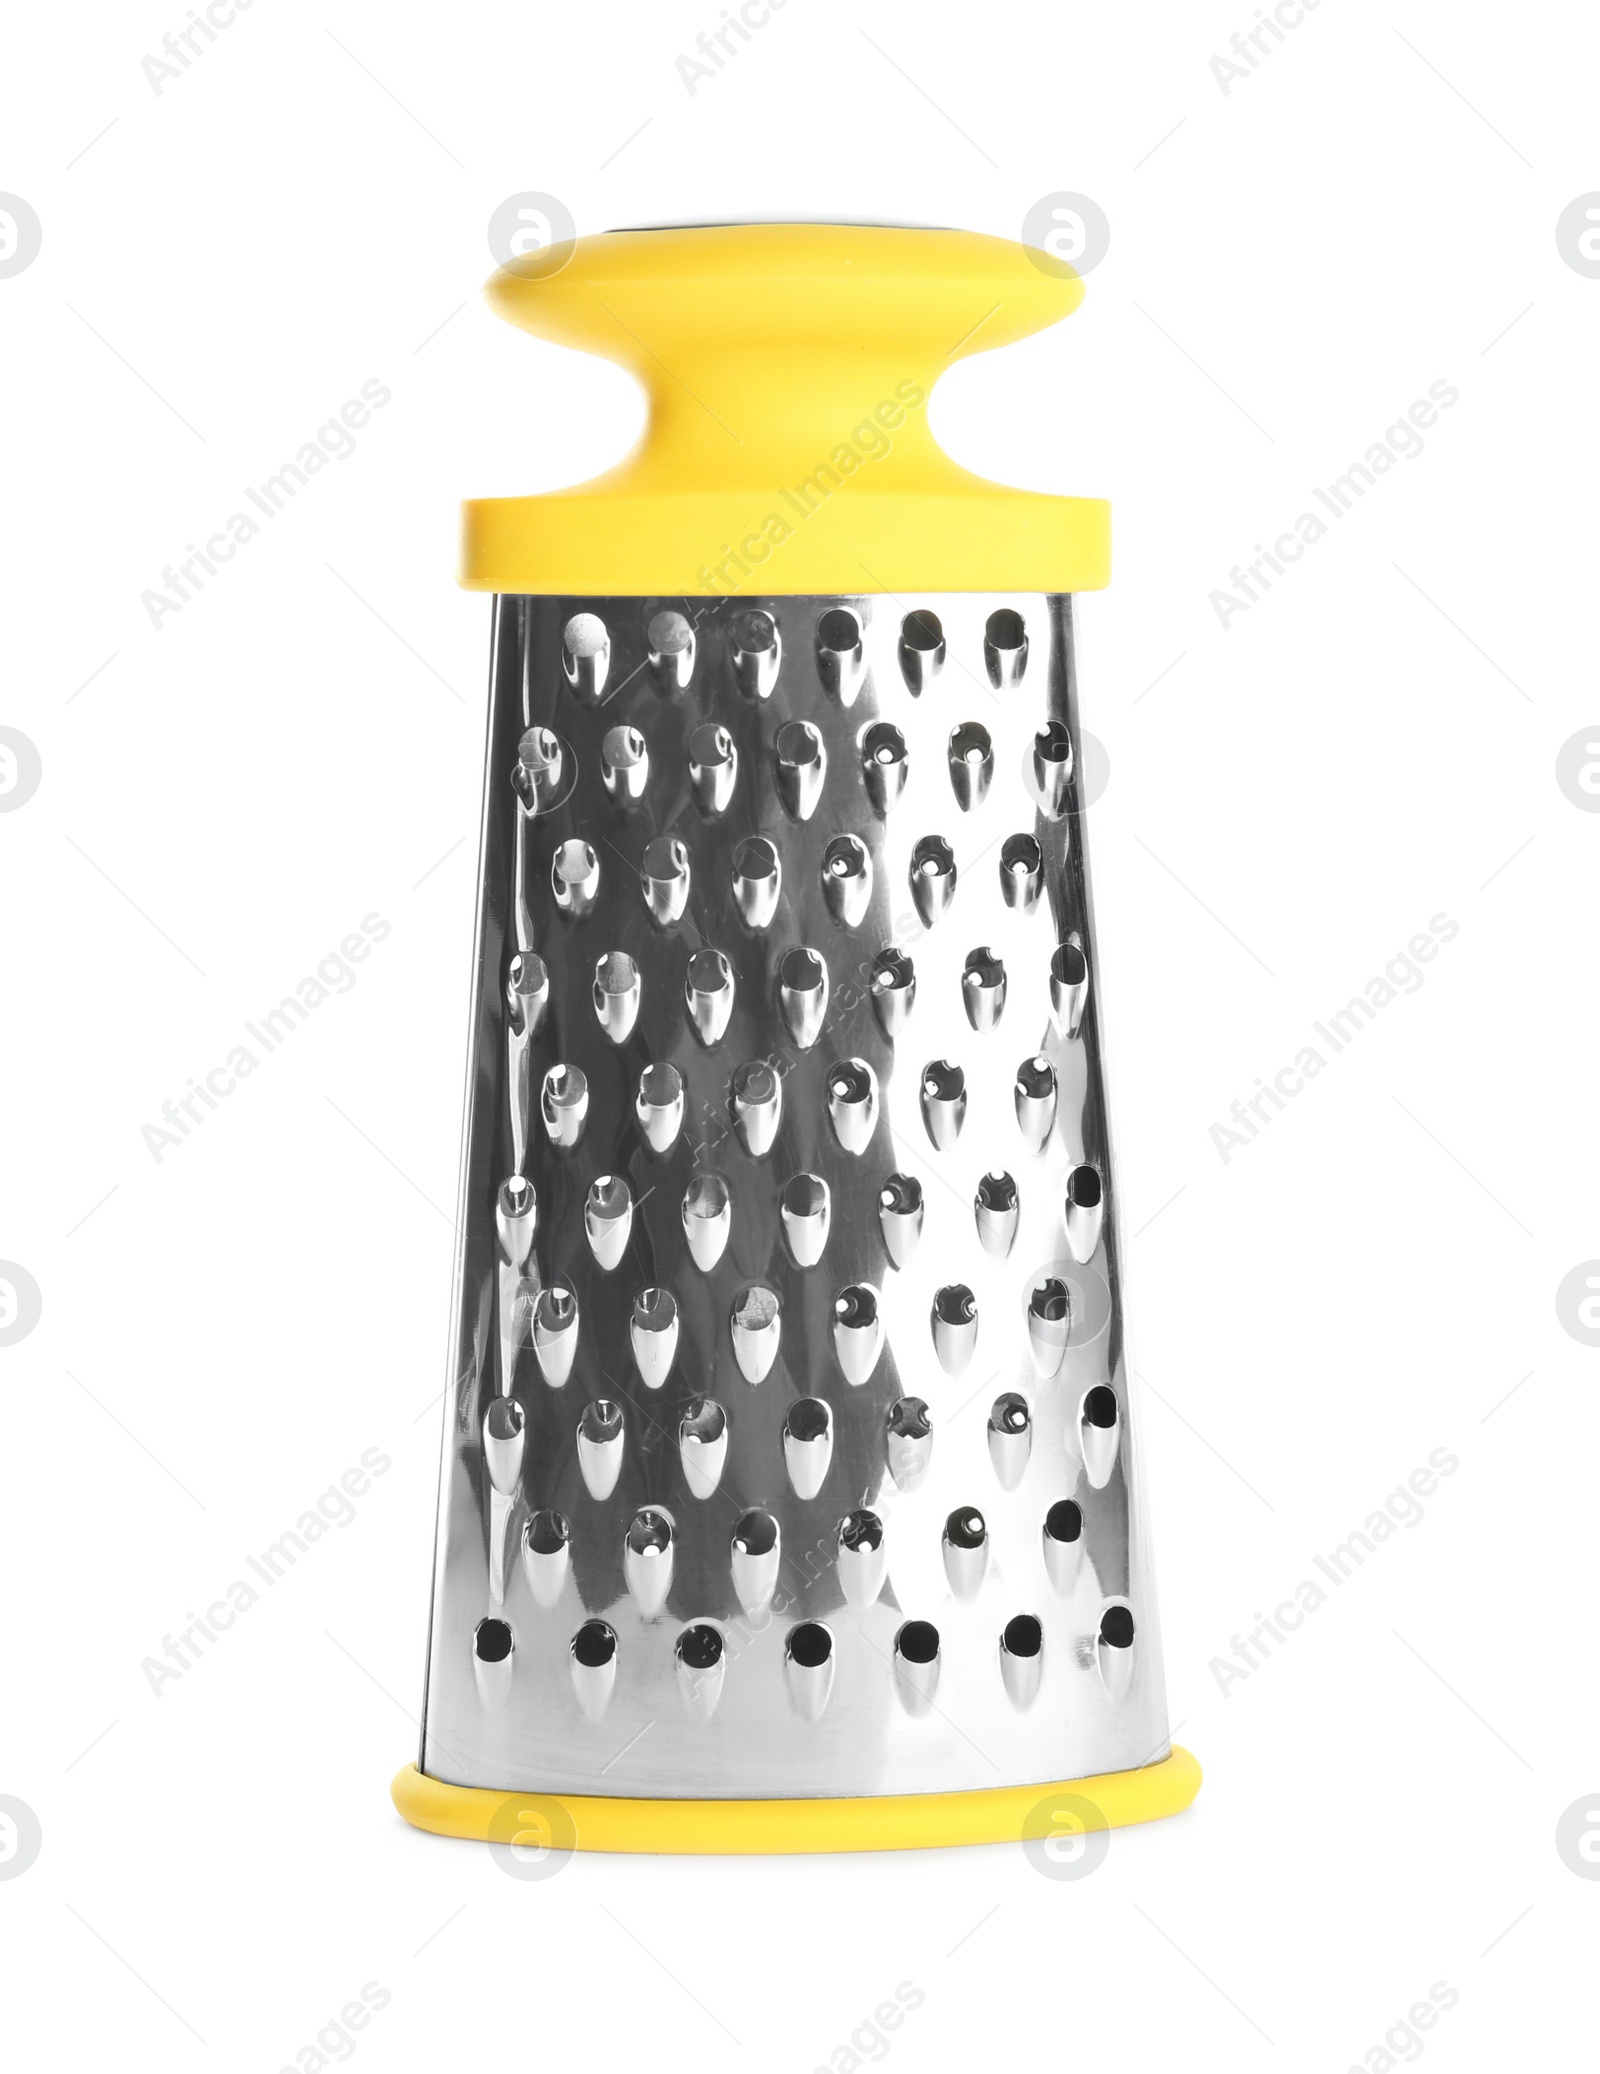 Photo of New clean grater with yellow handle isolated on white. Cooking utensil